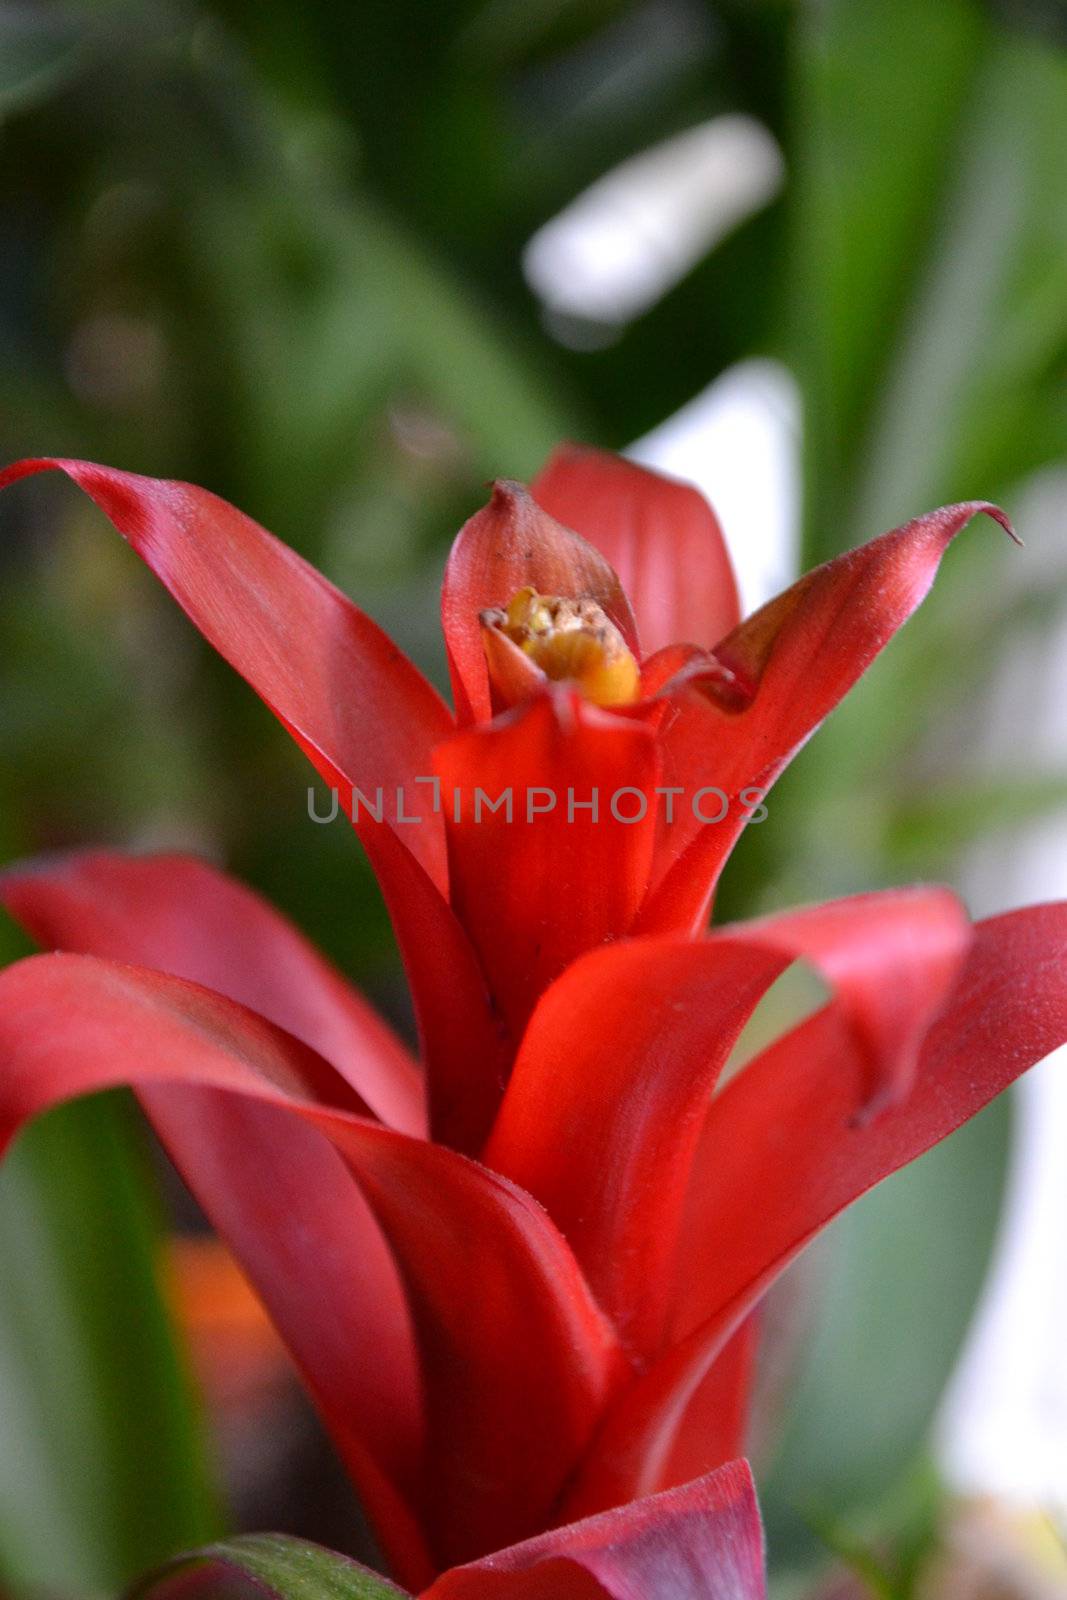 Bromelia mix is one of the most popular home plants